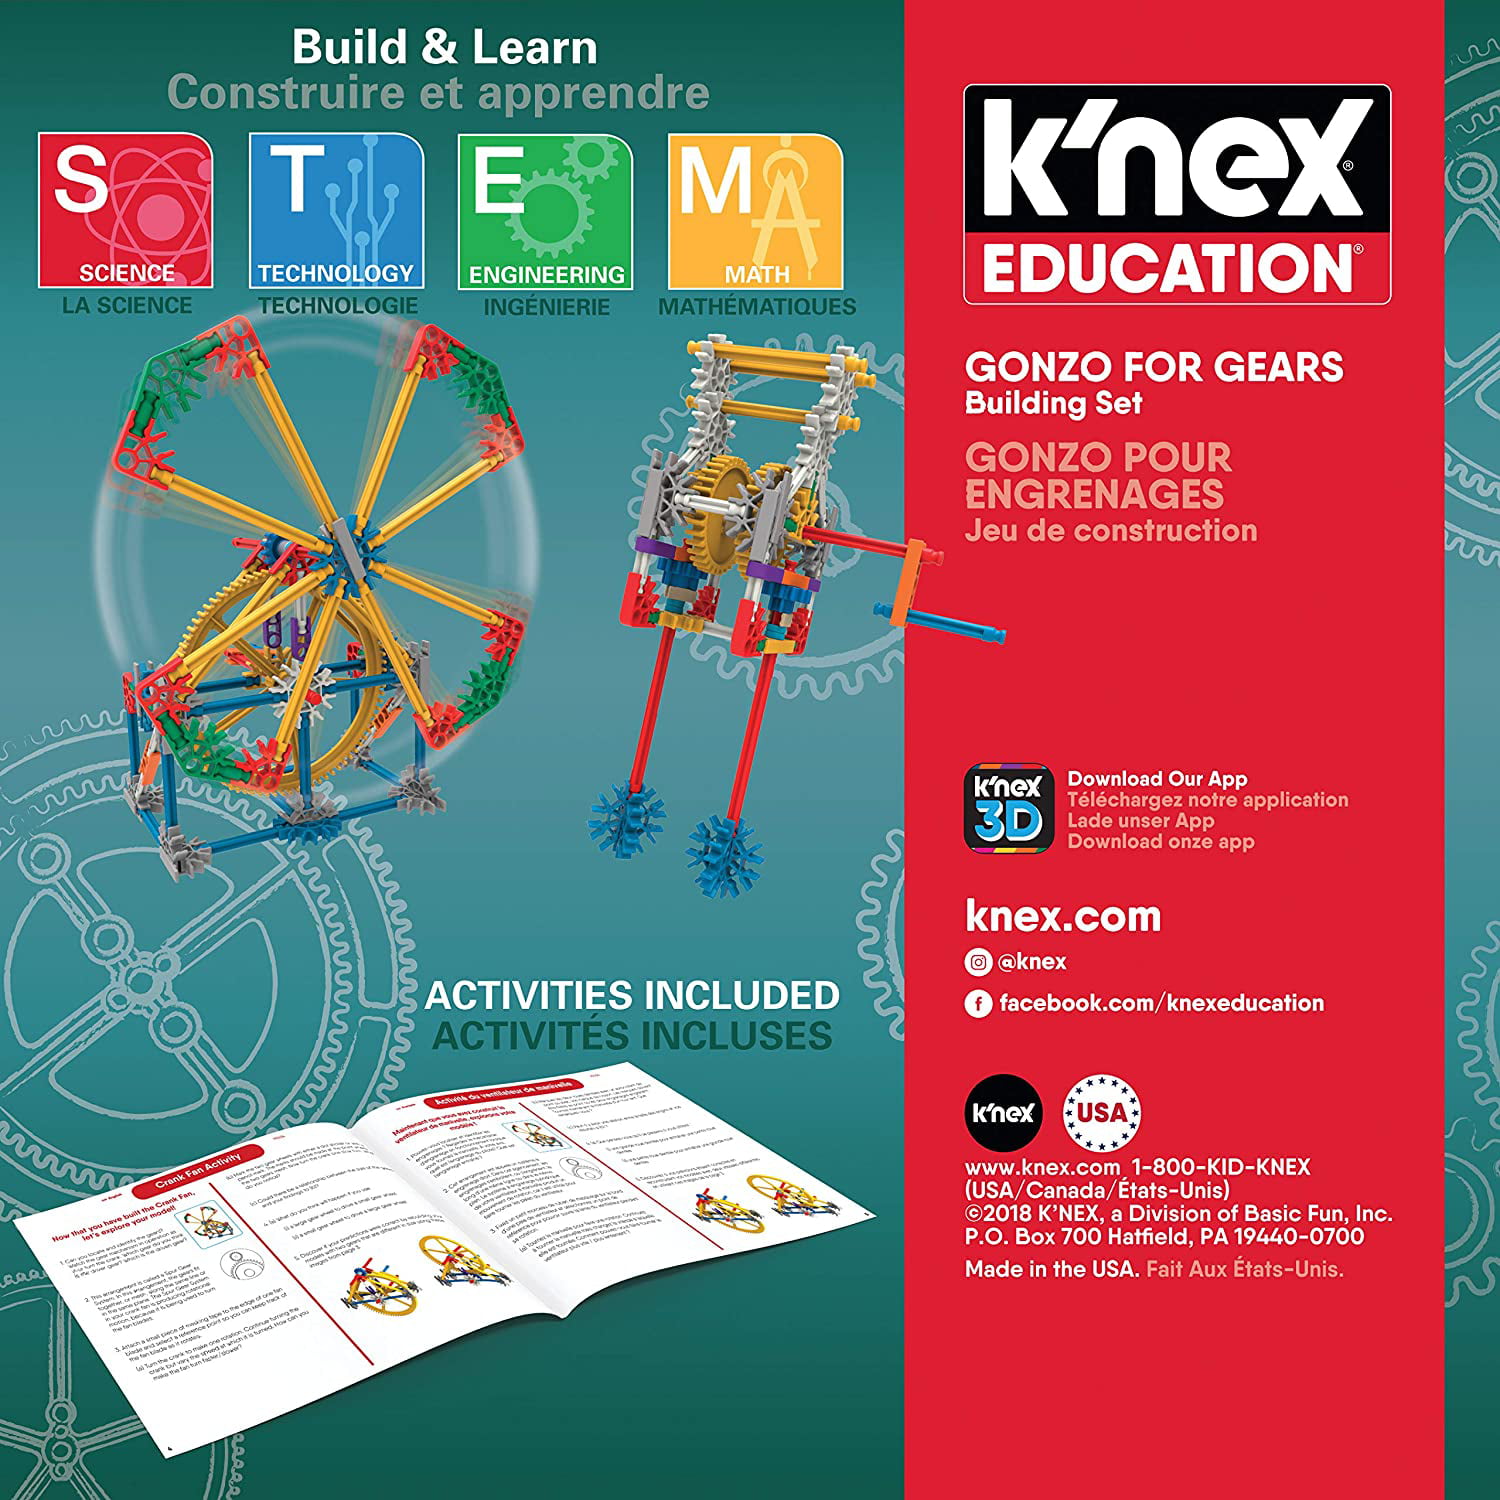 K 'NEX Gonzo for gears 198 pieces engineering education toy construction games 